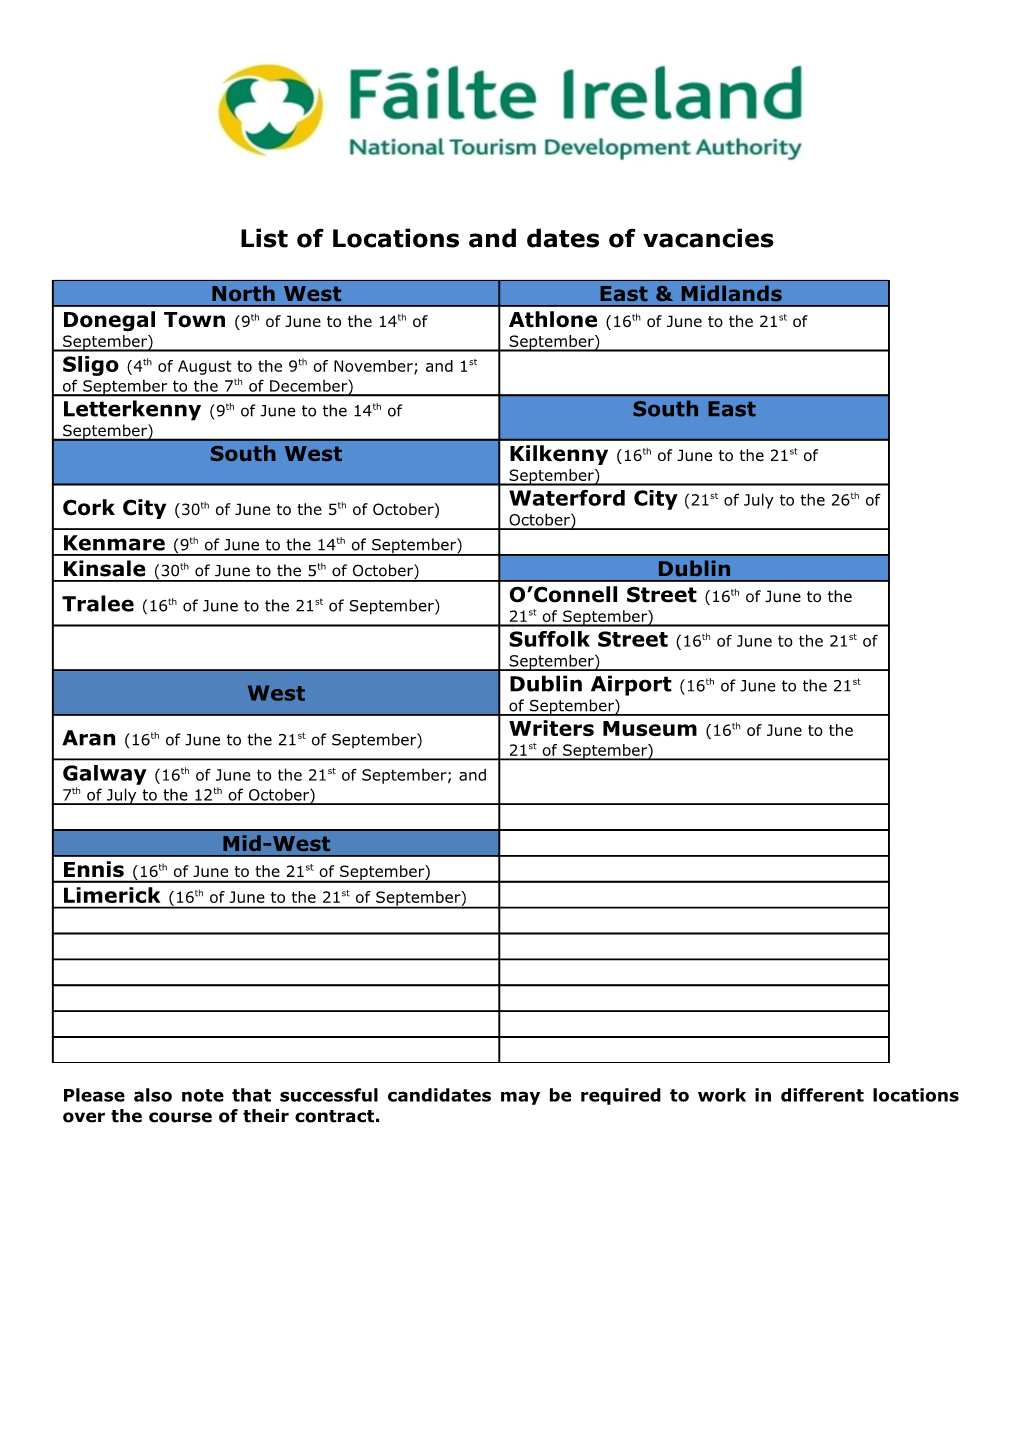 List of Locations and Dates of Vacancies